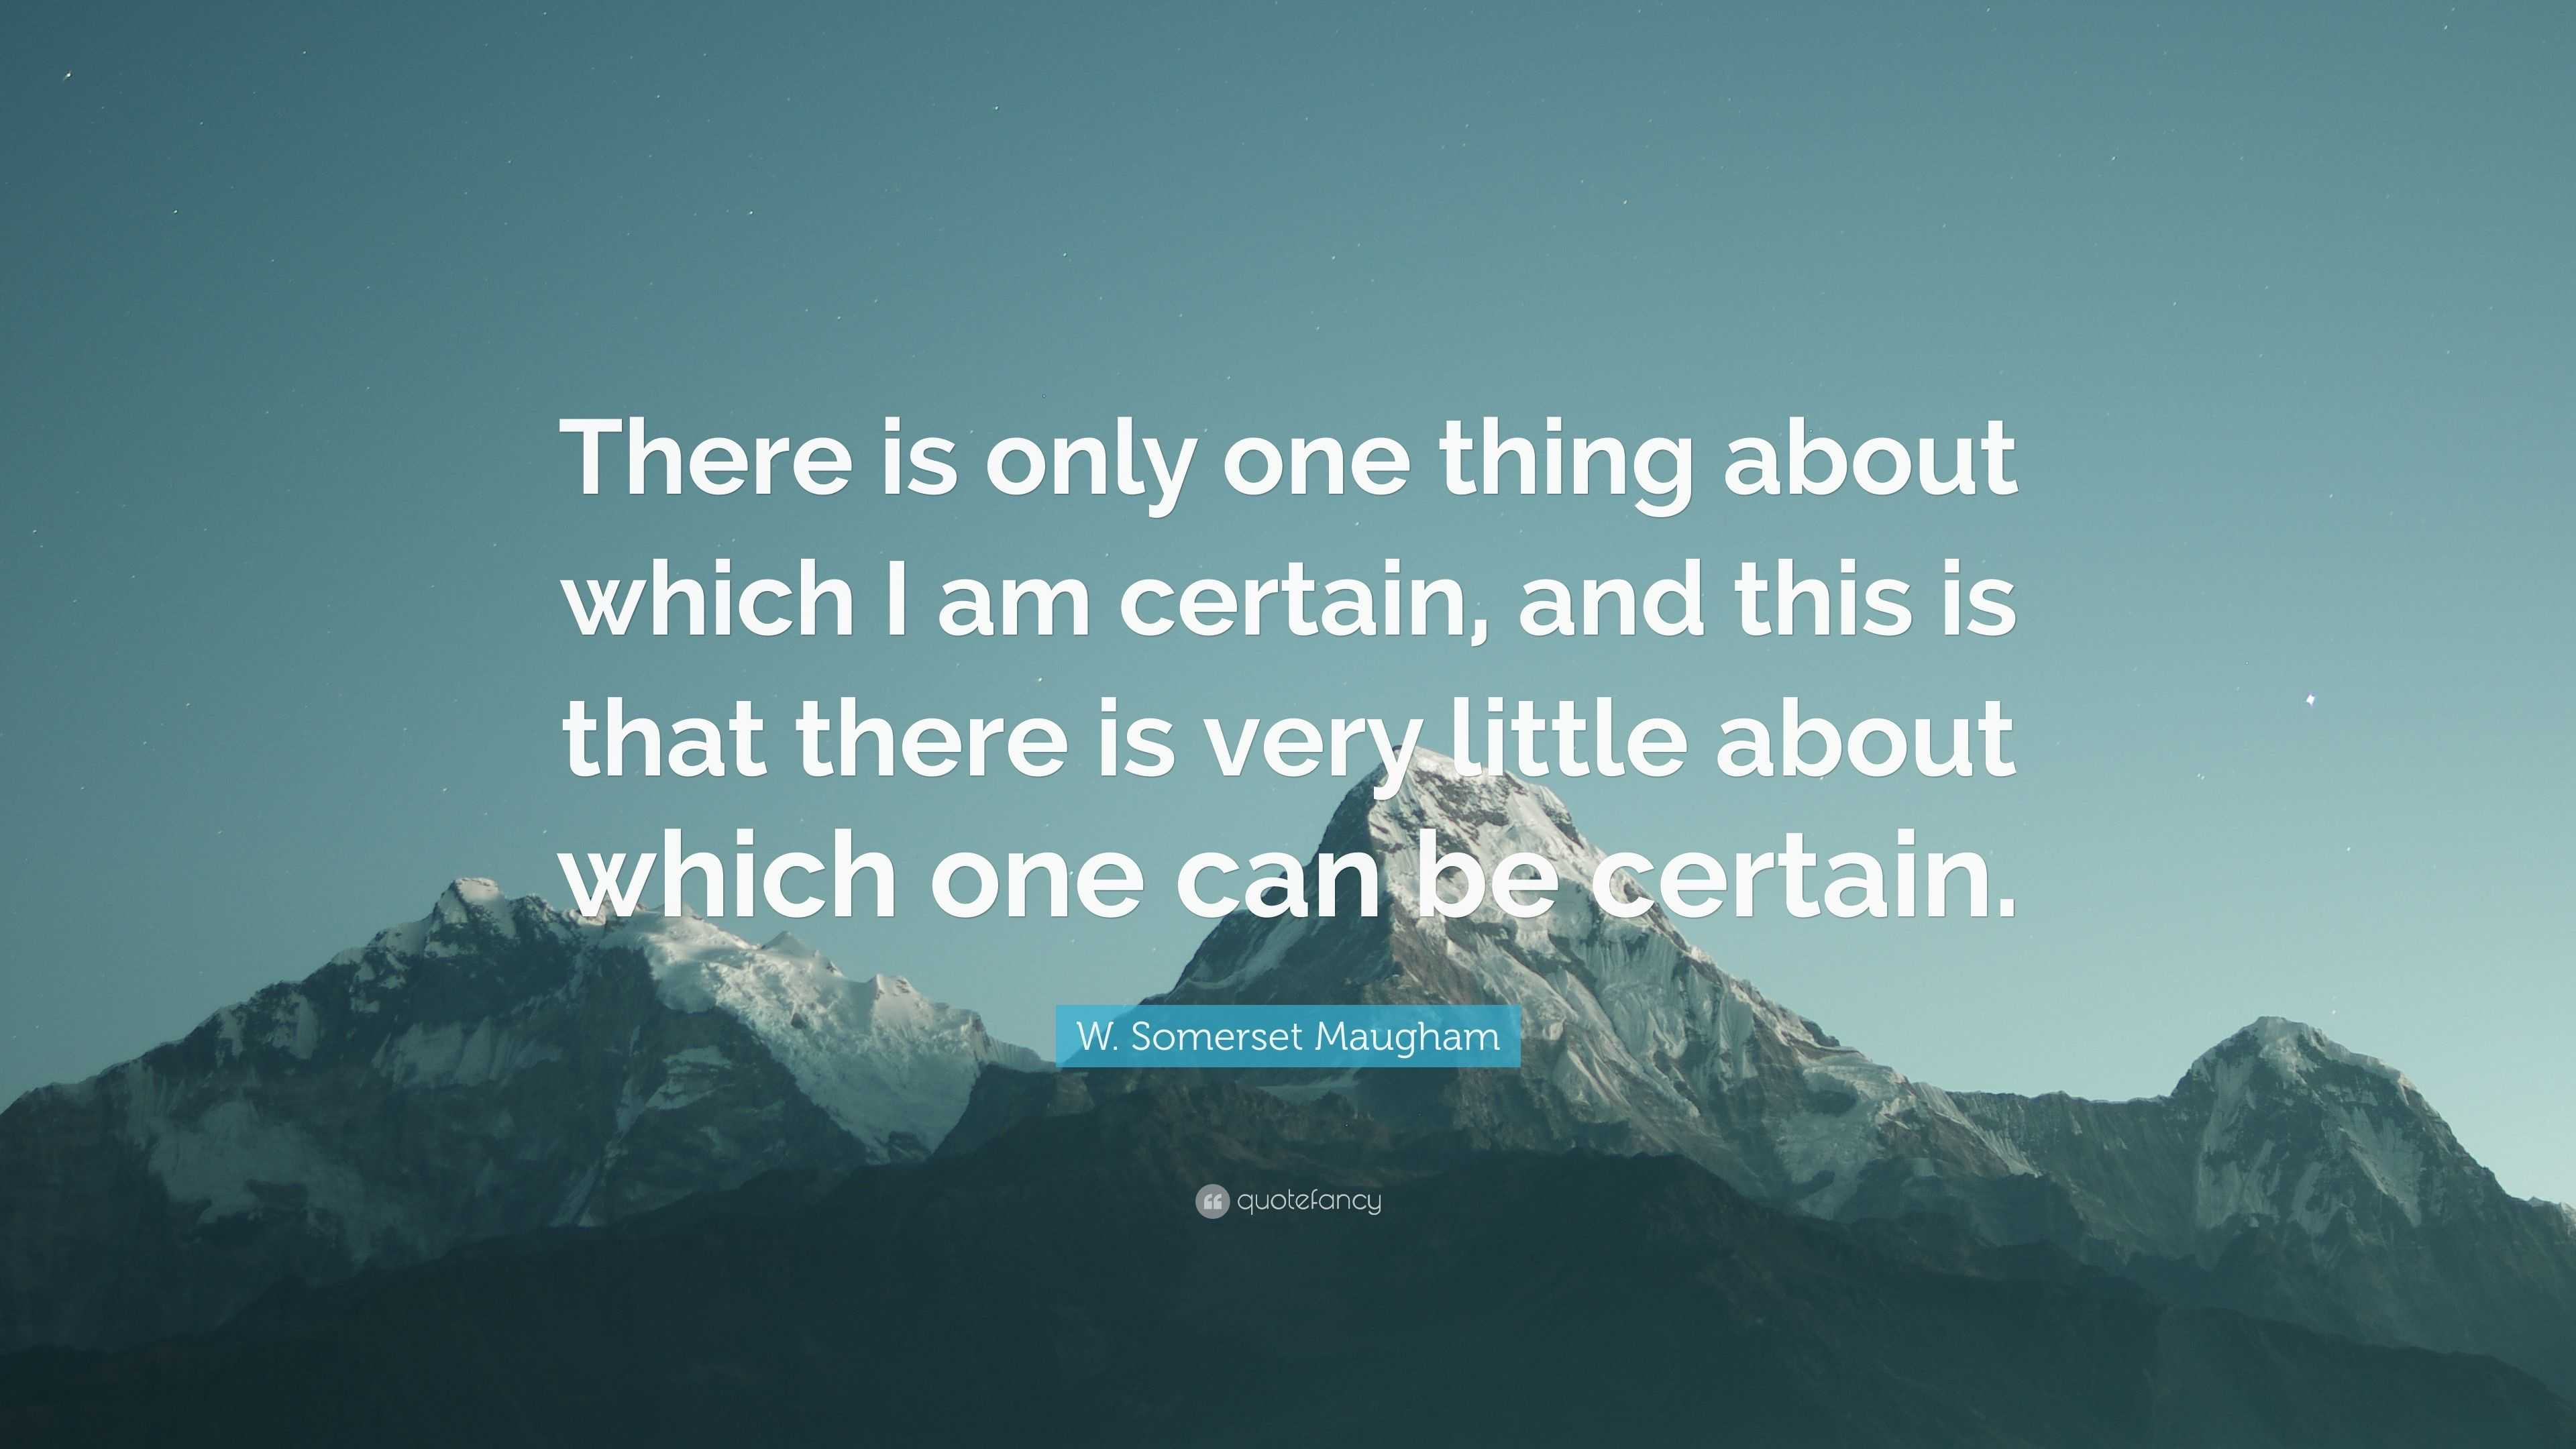 W. Somerset Maugham Quote: “There is only one thing about which I am ...